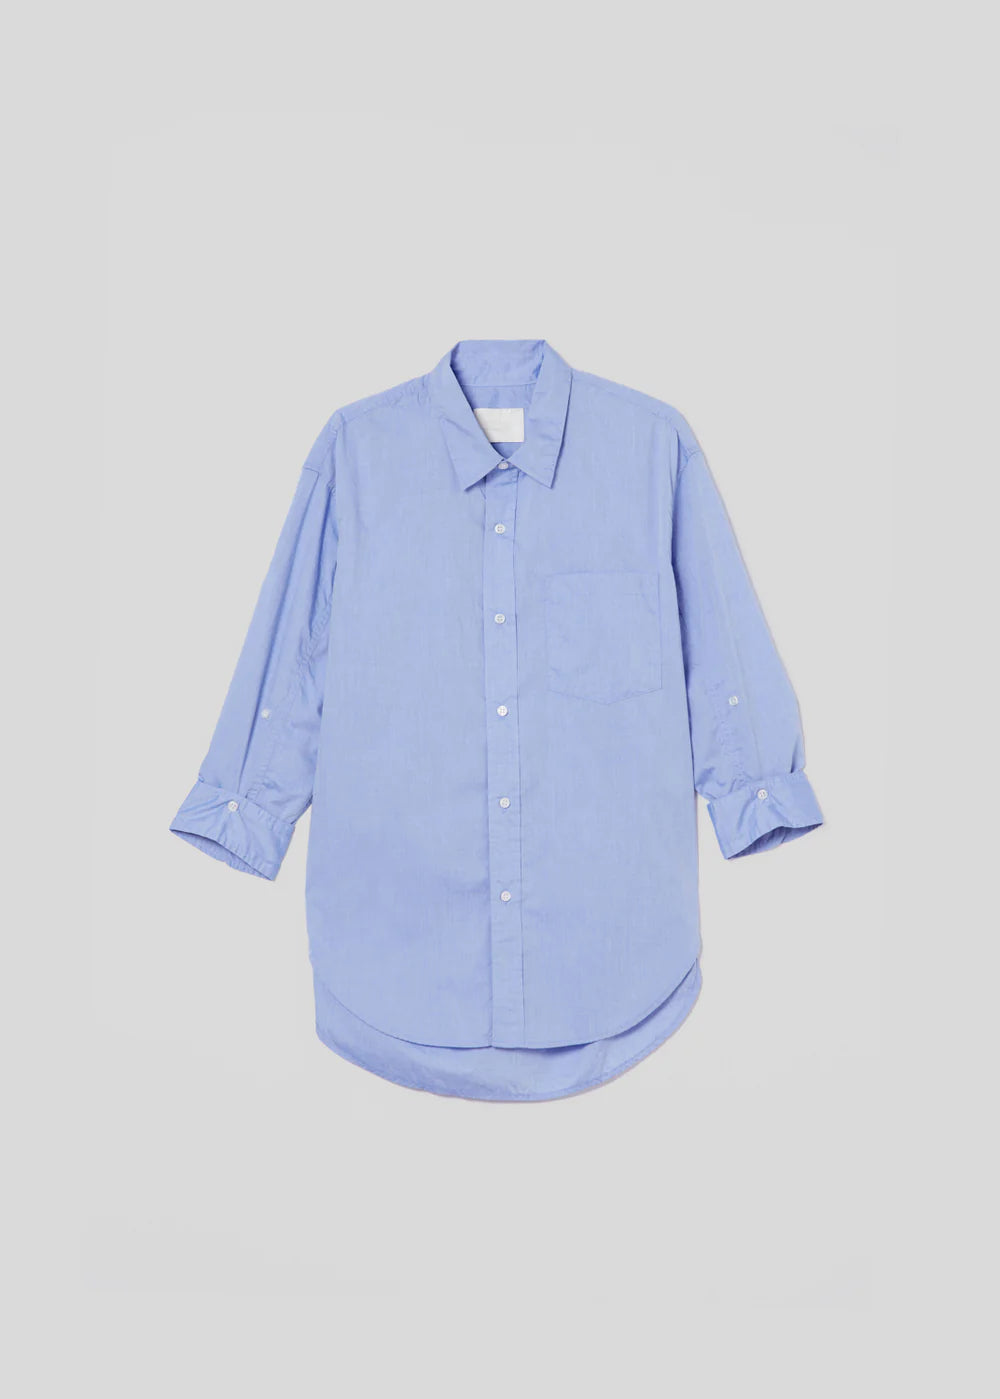 Kayla Shirt in Blue End on End